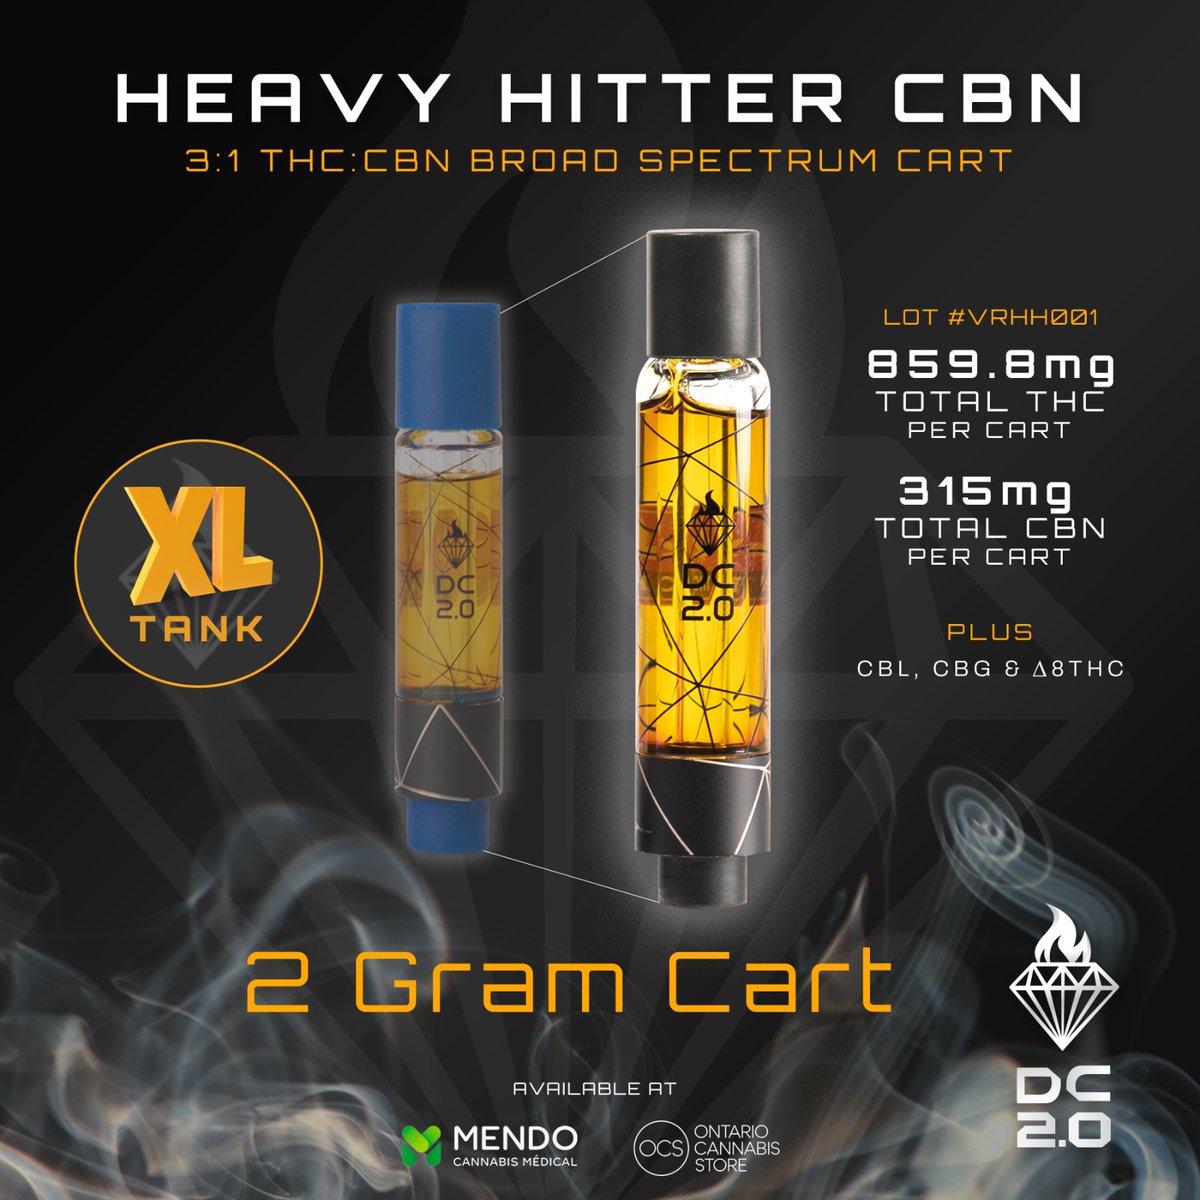 Dymond Concentrates Heavy Hitter 
- Extra Large 2 Gram Tank
- 3:1 THC:CBN Broad Spectrum 
- 859.8mg of THC per Cart
- 315mg of CBN per Cart

Available now in Ontario at participating Dispensaries, @ONCannabisStore and also across Canada @MendoMedical 

#CBN #2gramvape #vape